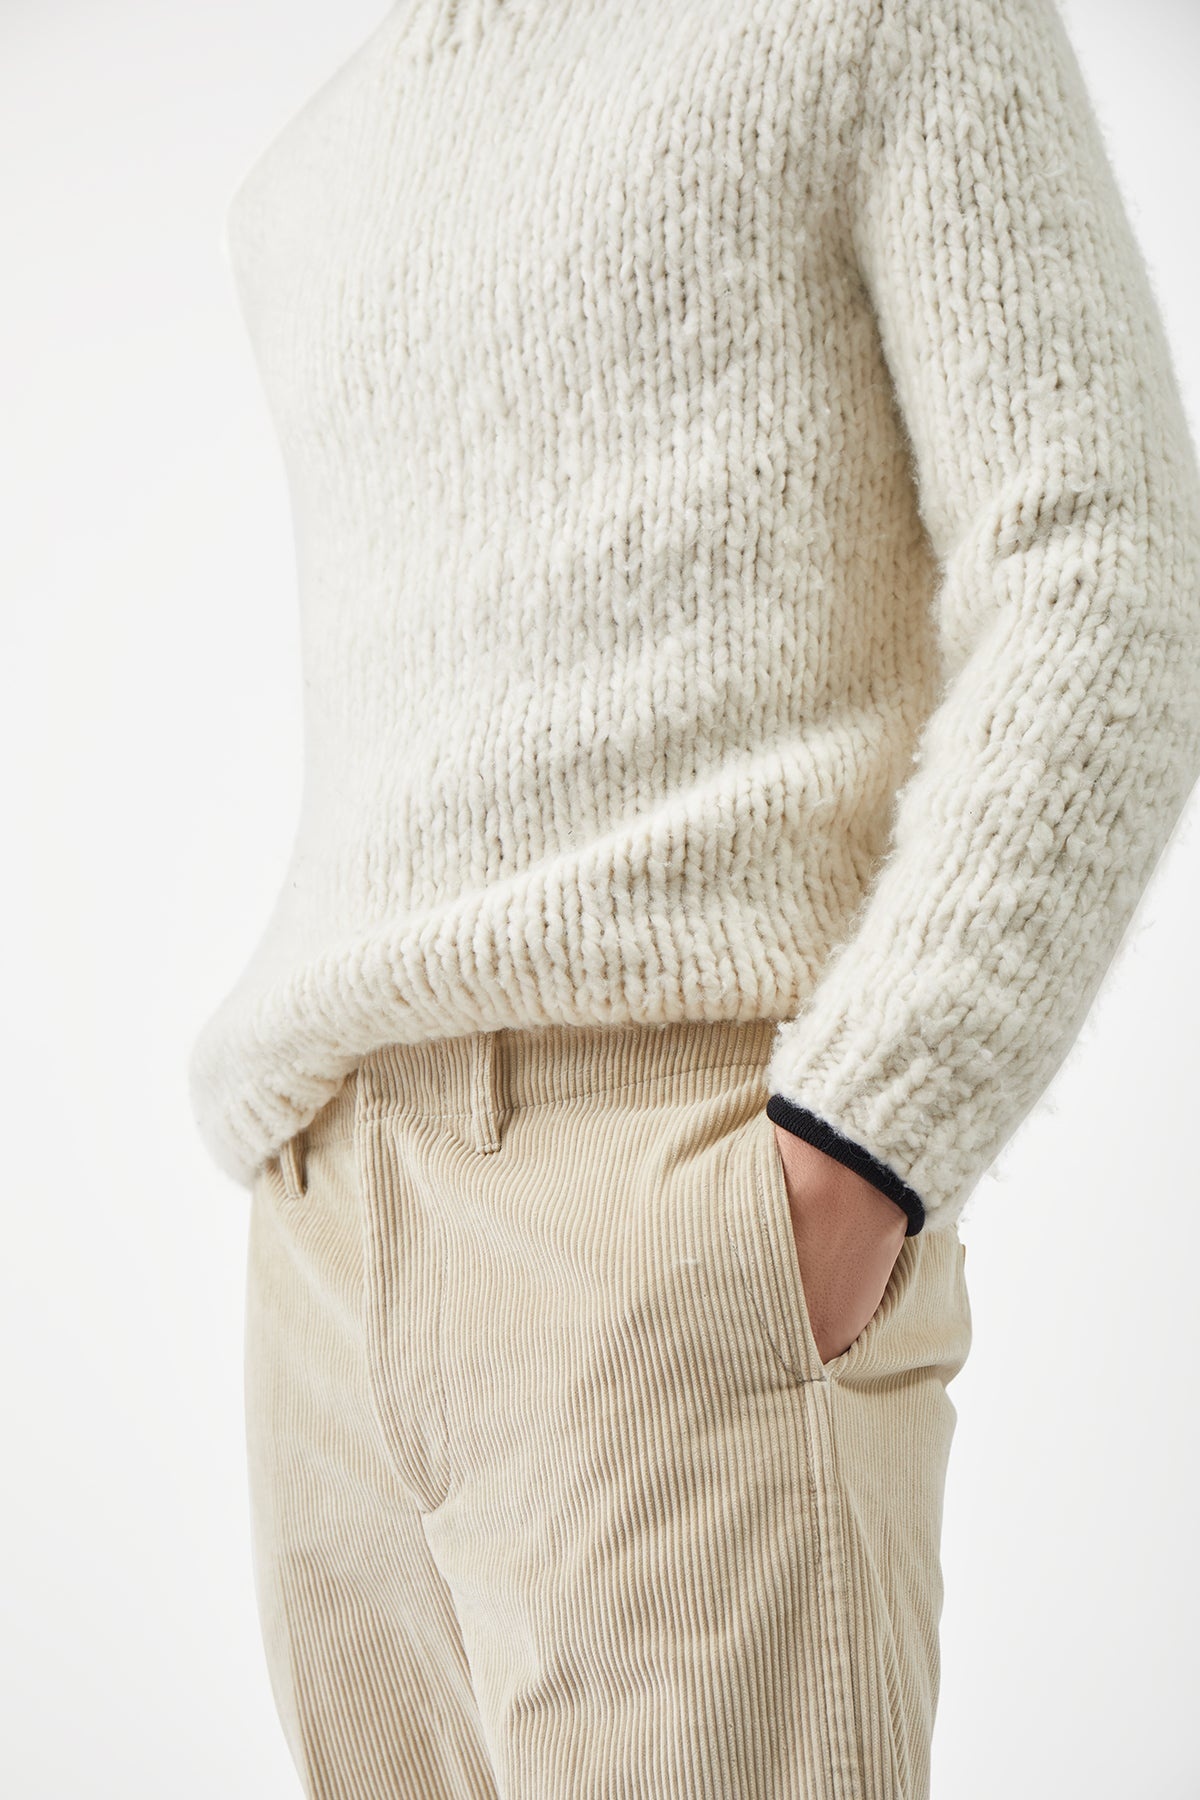 Lawrence Knit Sweater in Ivory Welfat Cashmere - 6